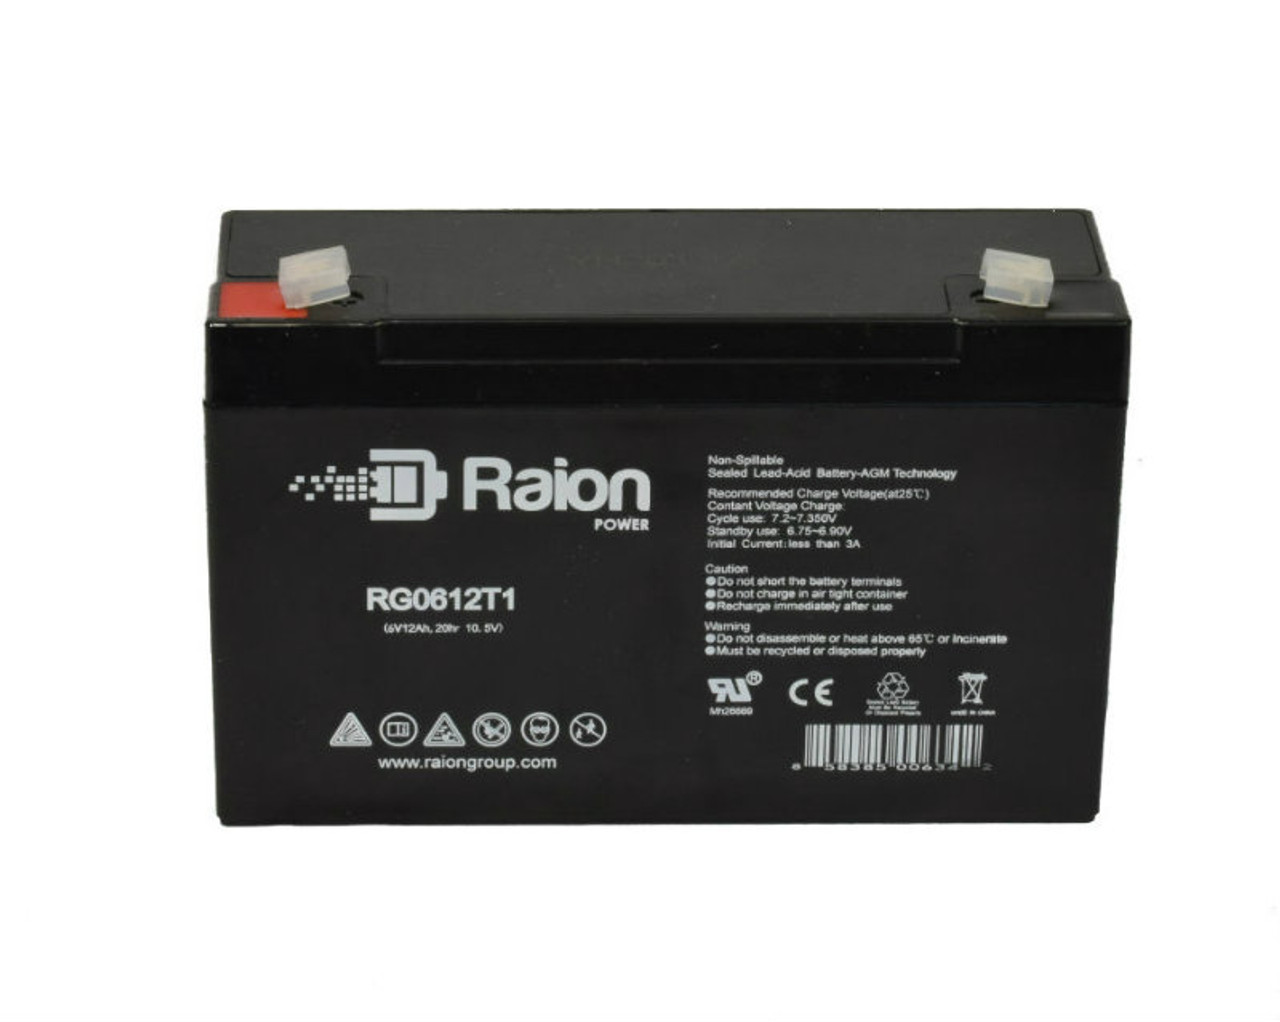 Raion Power RG06120T1 Replacement Battery Cartridge for Sola NETWORK UPS 600VA